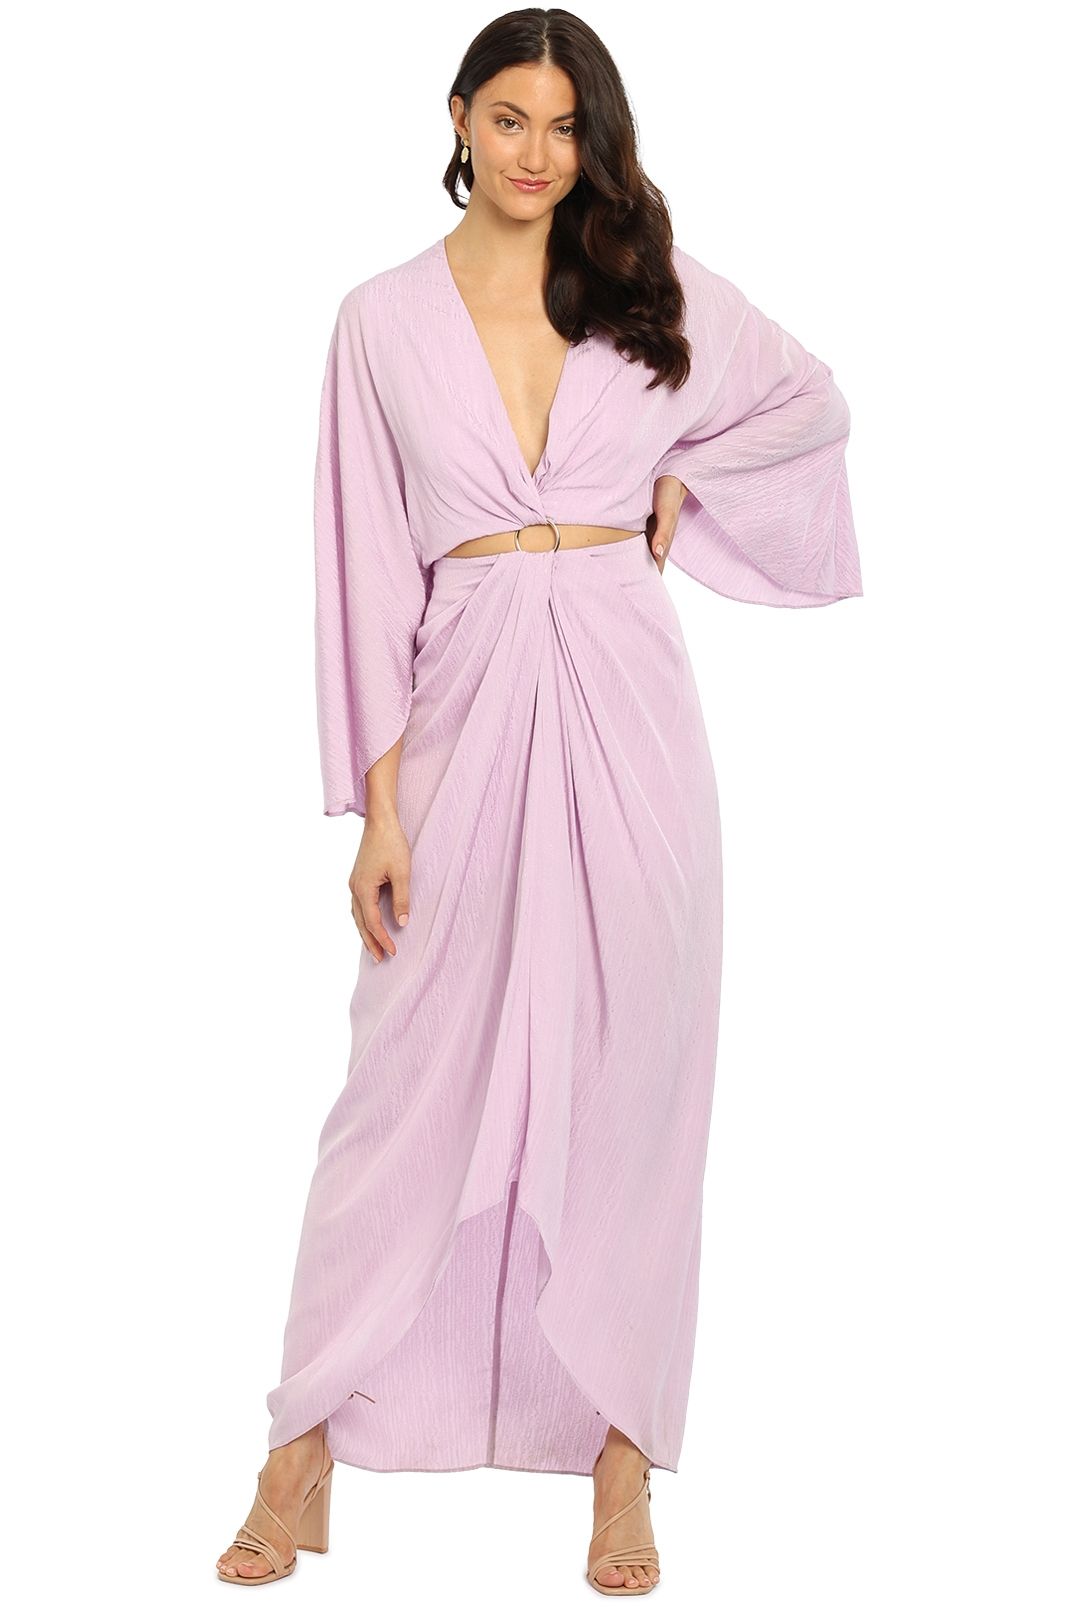 SIGNIFICANT OTHER - Provence Dress - Lilac